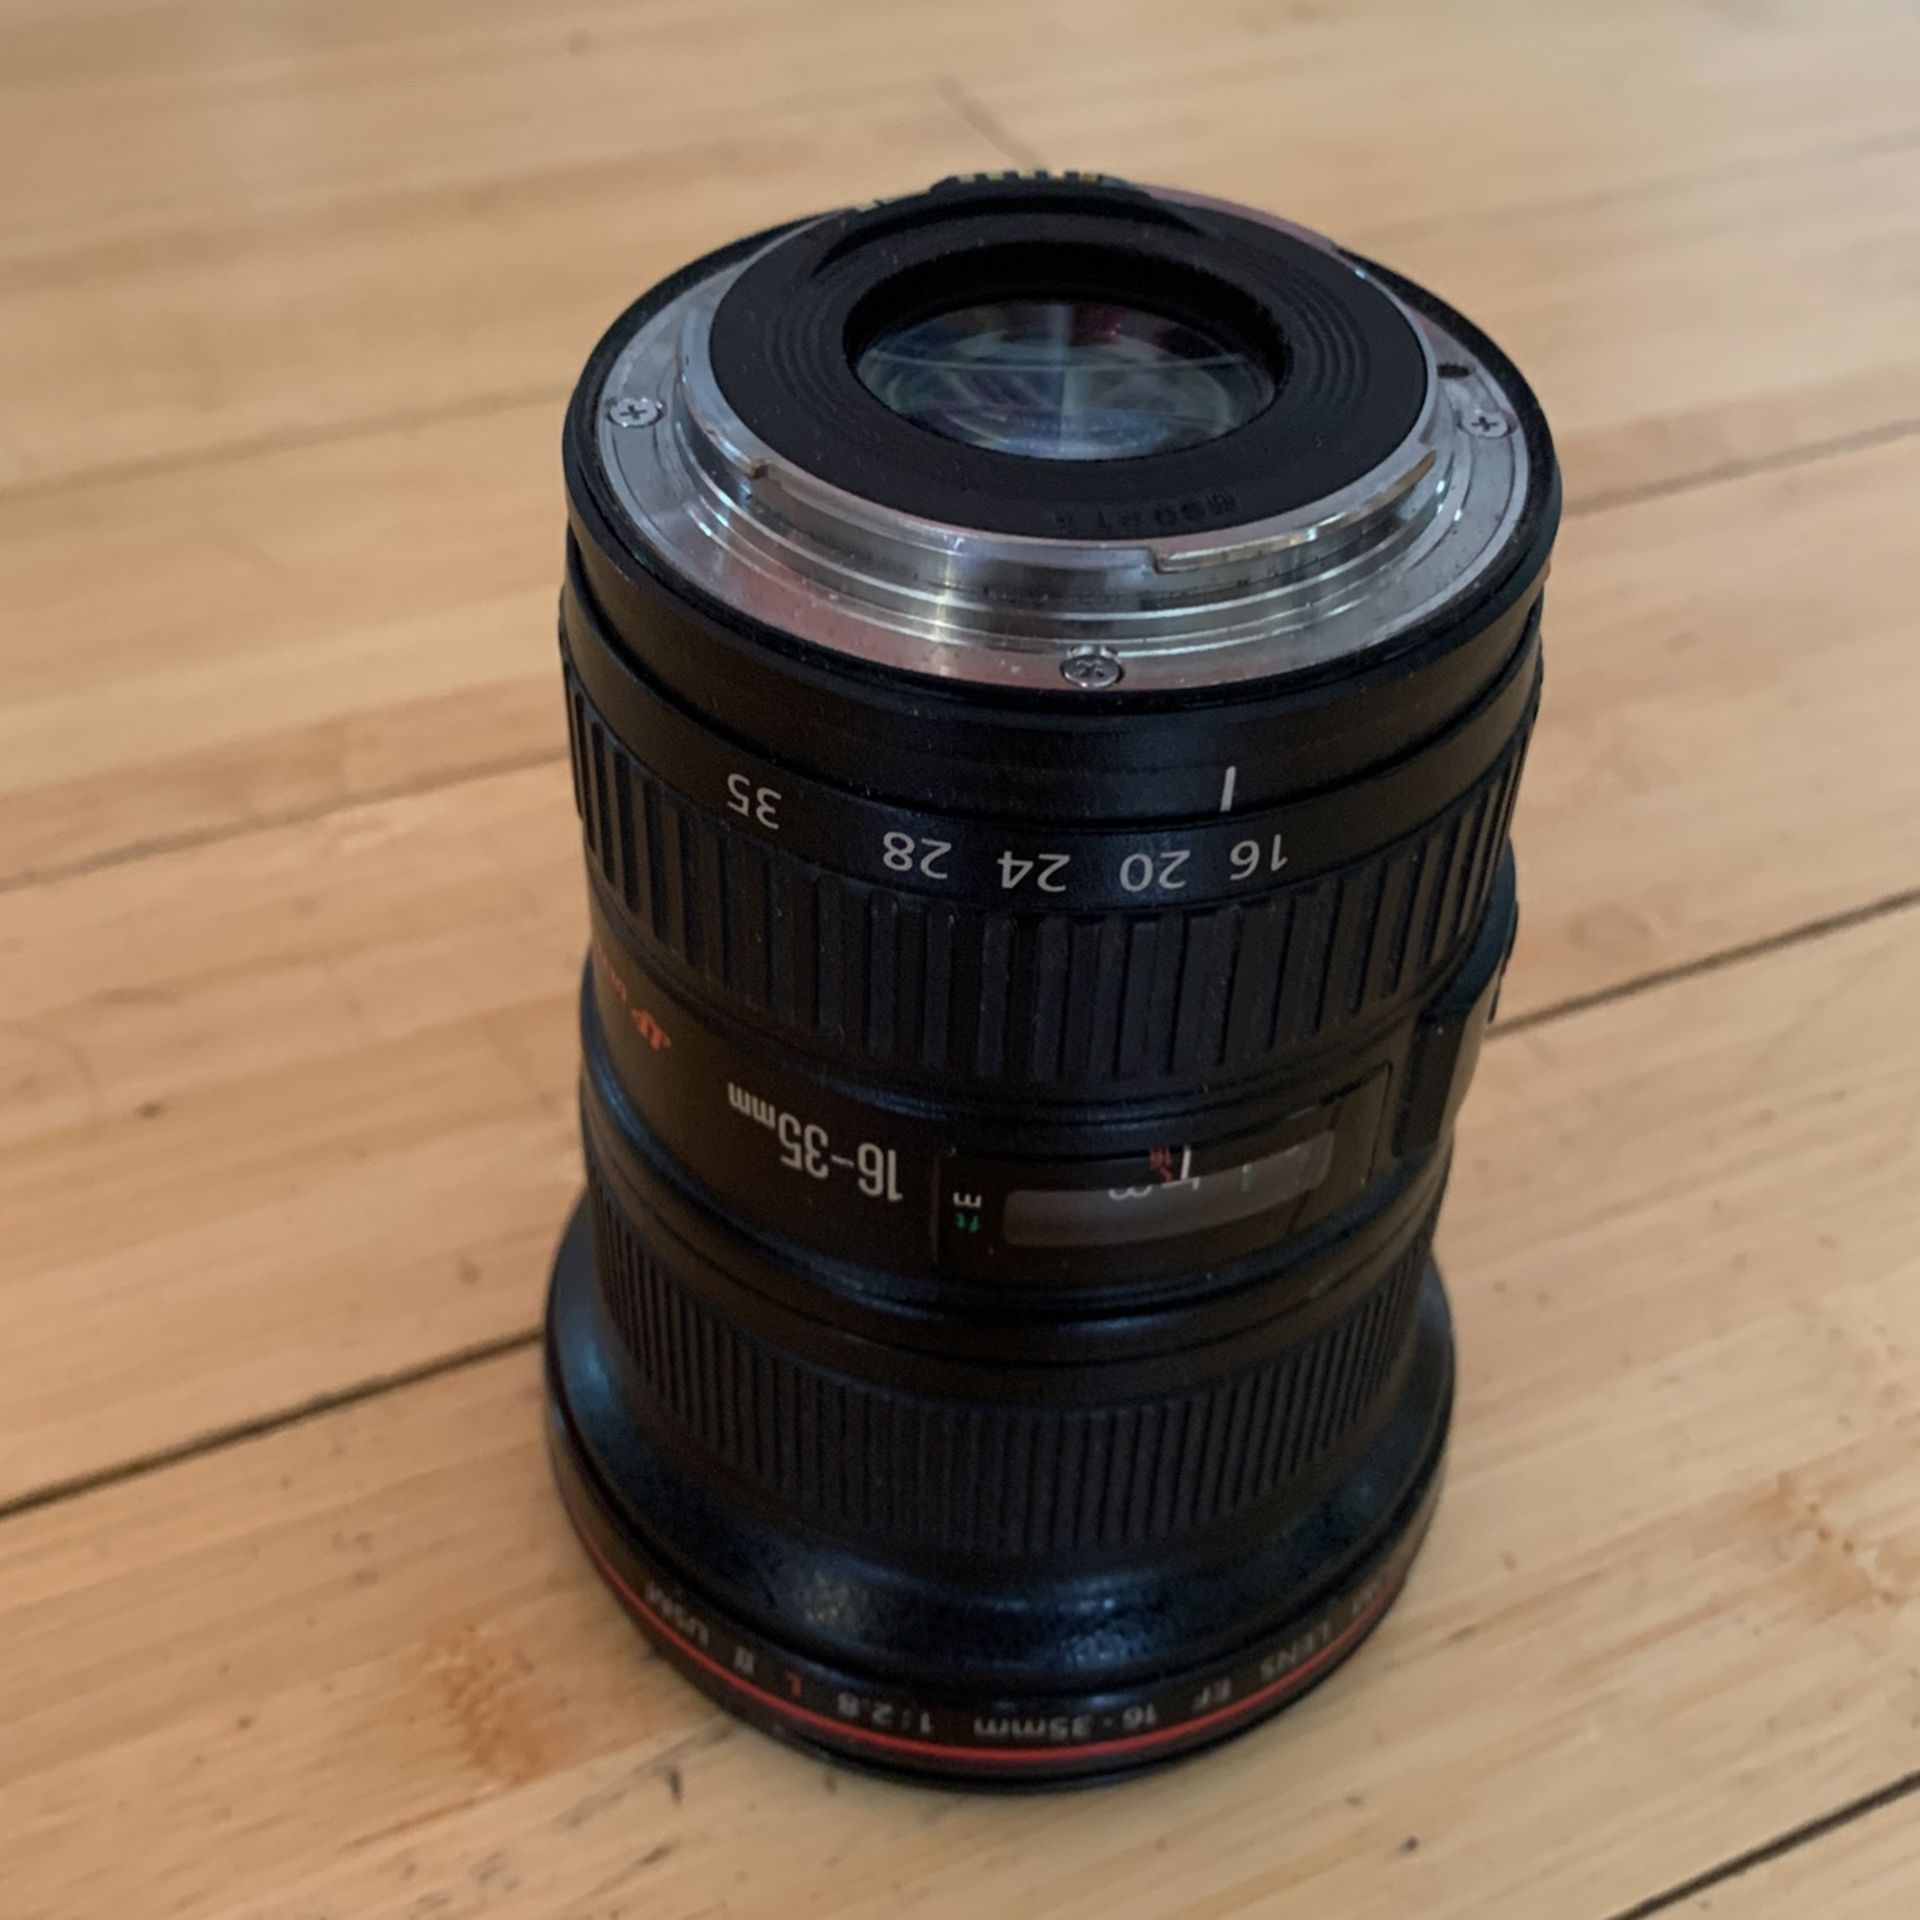 Canon Zoom 16-35mm